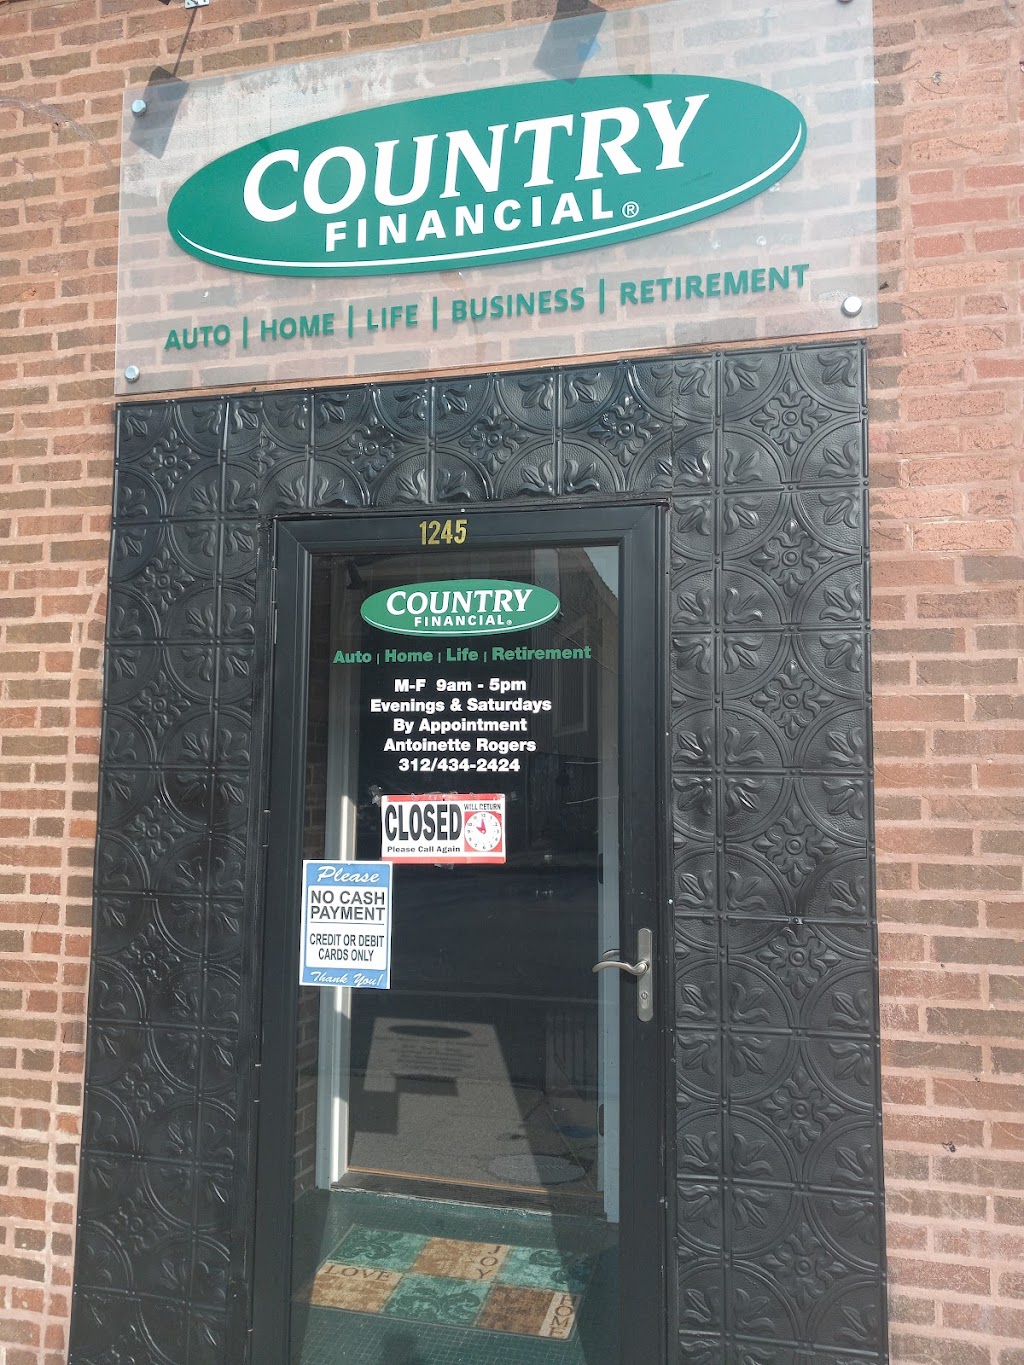 Antoinette Rogers - Country Financial | 1245 S Kedzie Ave, Chicago, IL 60623 | Phone: (312) 434-2424